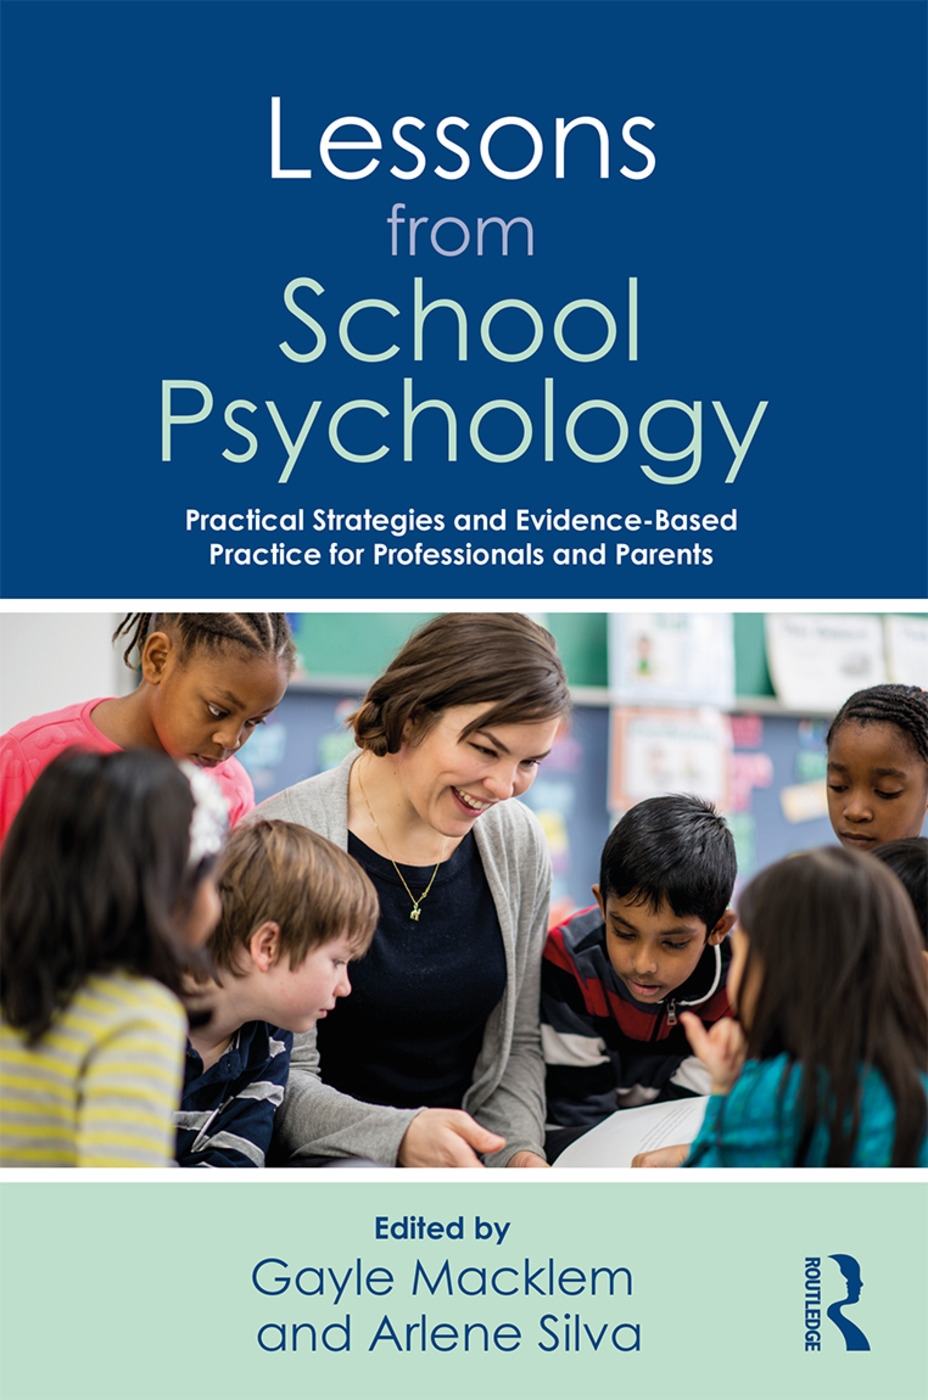 Lessons from School Psychology: Practical Strategies and Evidence-Based Practice for Professionals and Parents